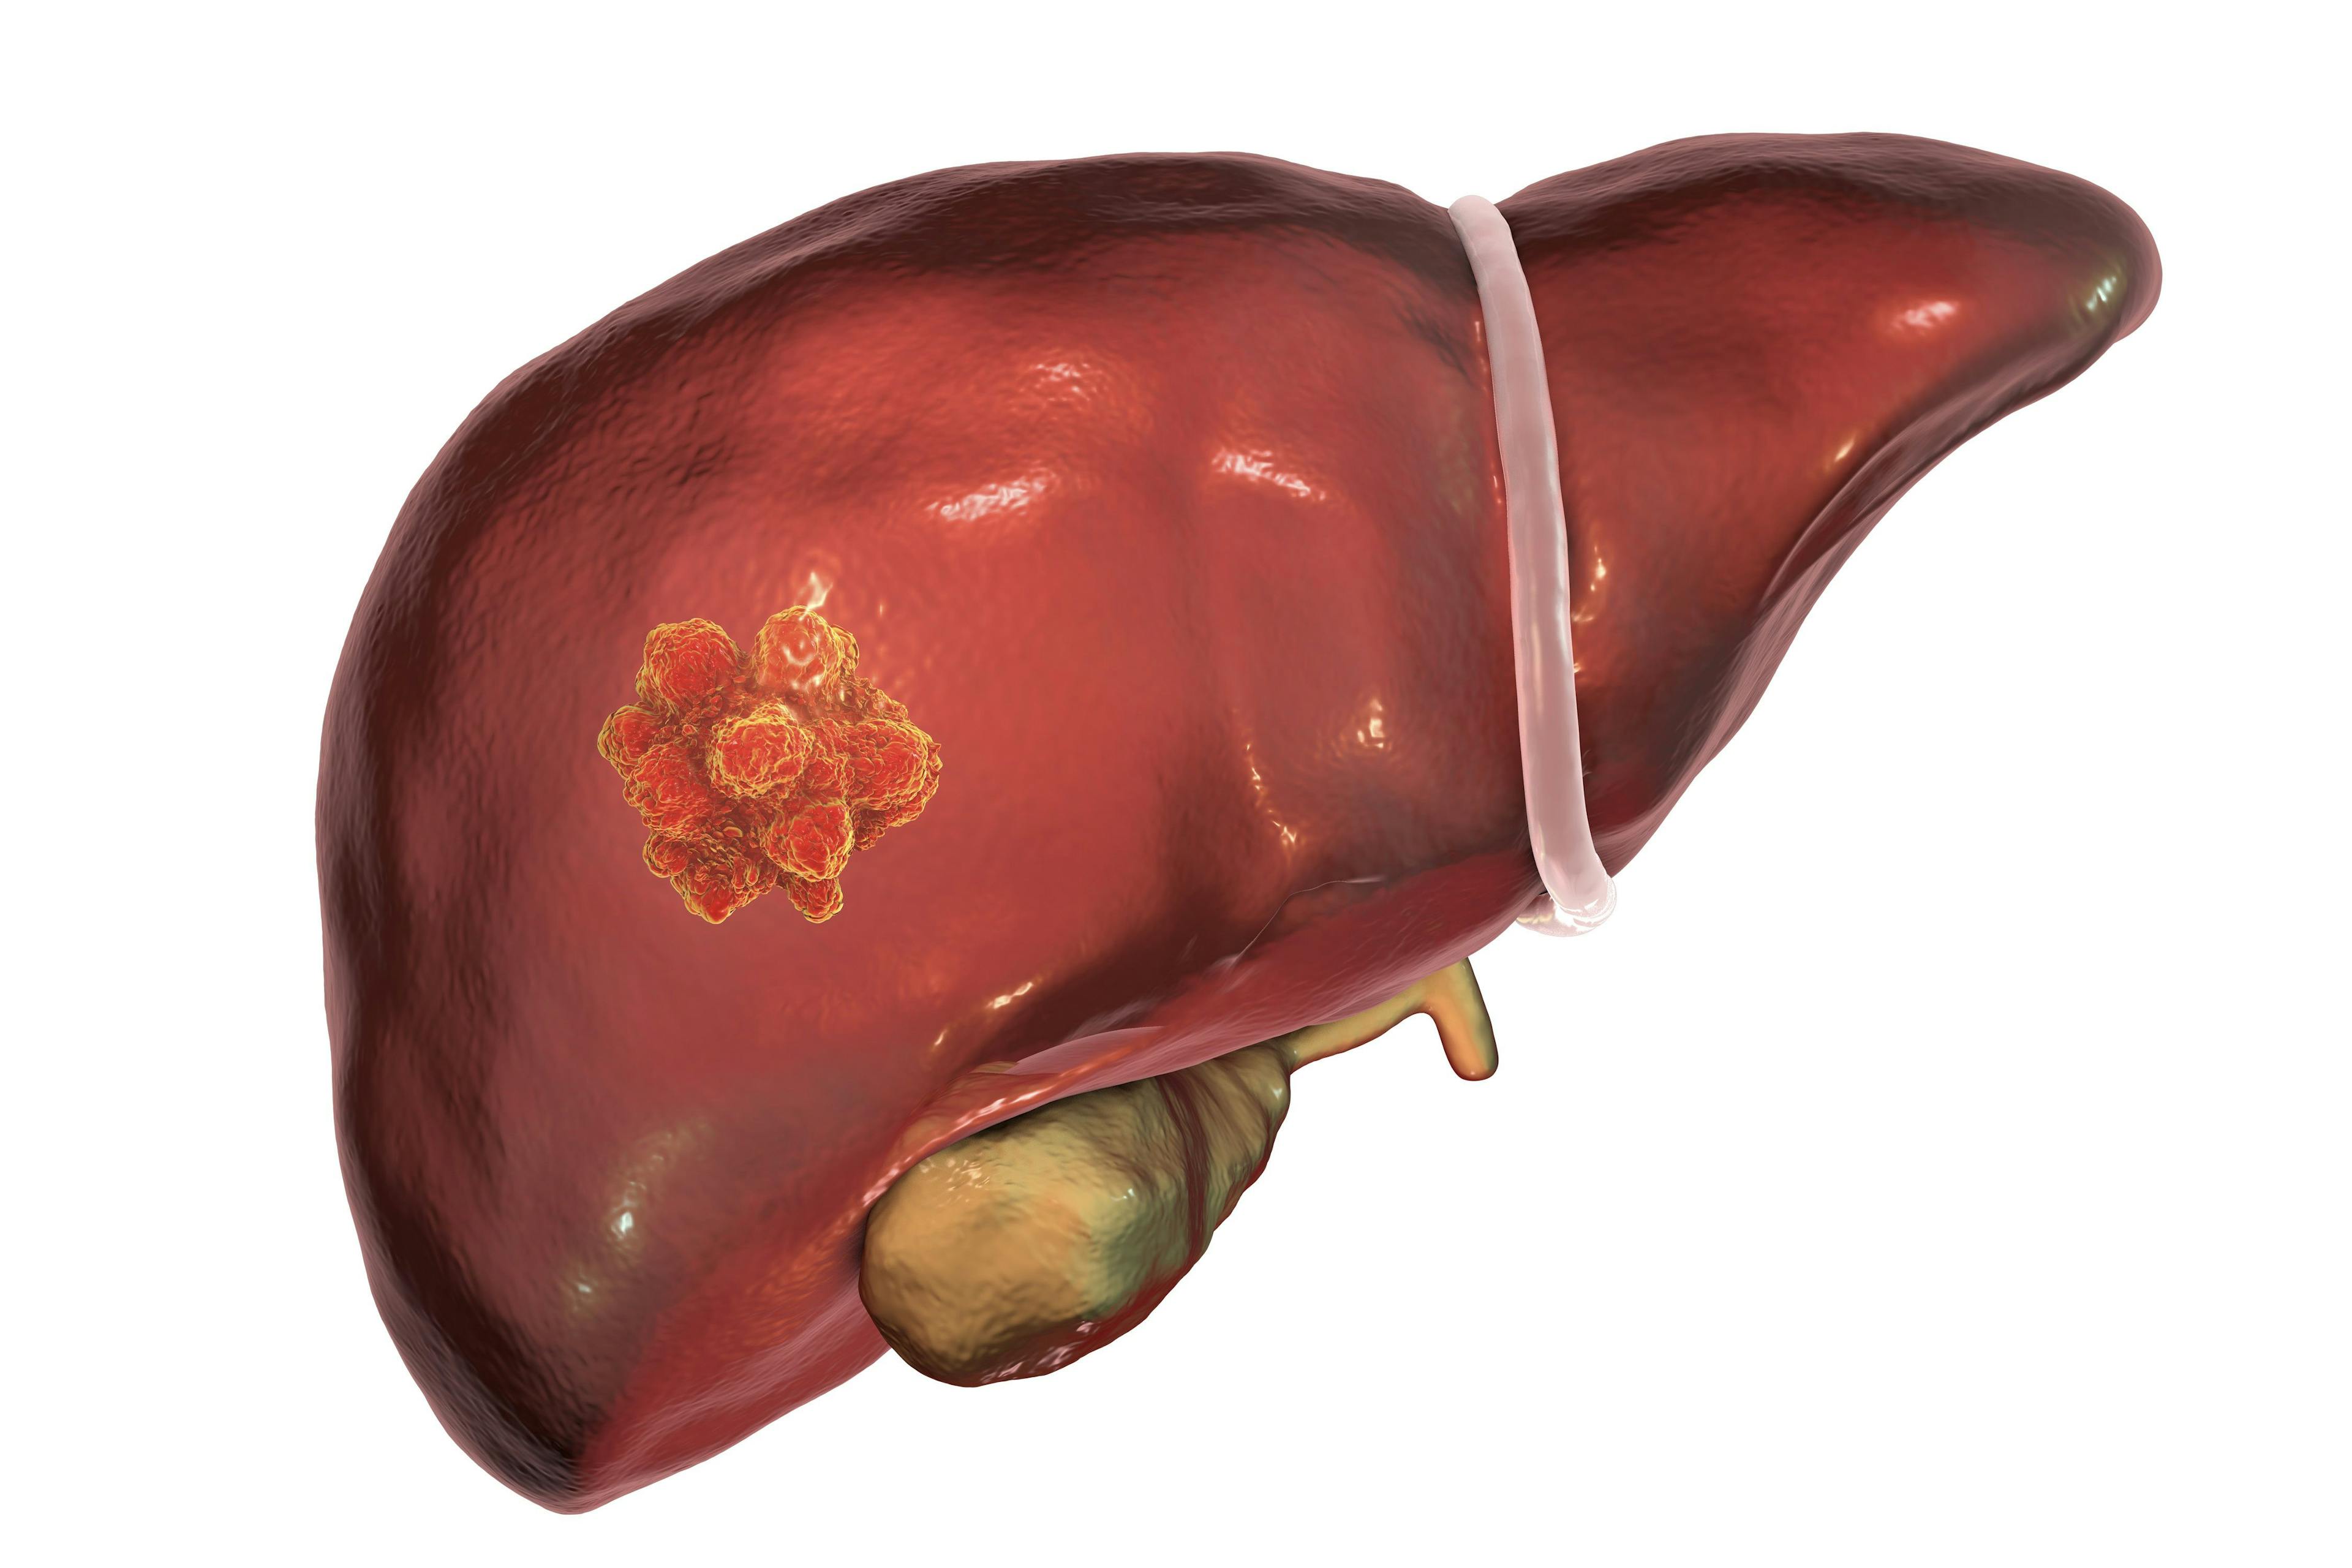 Investigators are assessing the safety, tolerability, and initial efficacy of BST02 in those with advanced or metastatic liver cancer as part of a phase 1 trial.